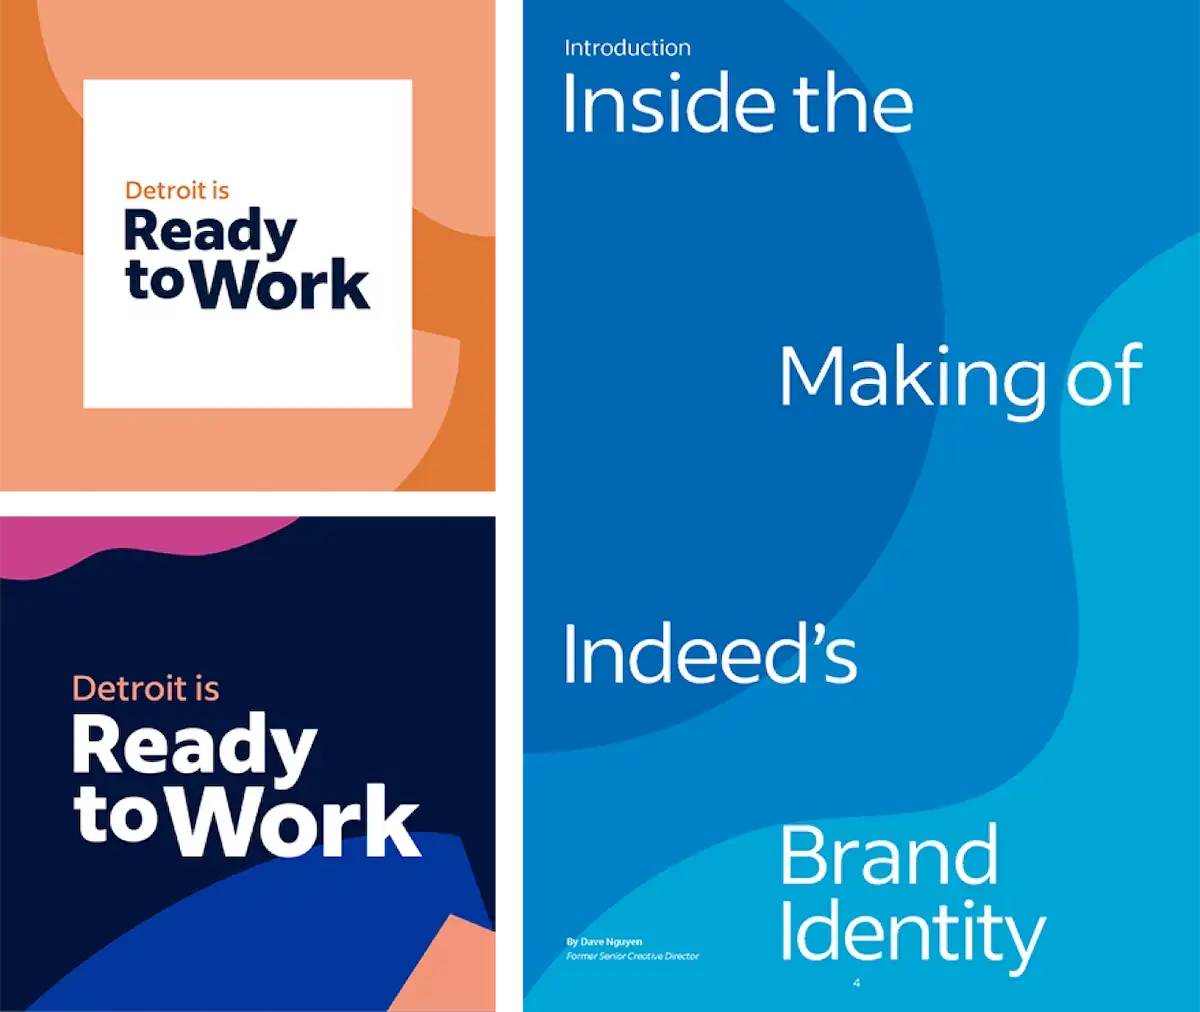 Over wavy shape backgrounds, the text Detroit is Ready to Work and text Inside the Making of Indeed's Brand Identity